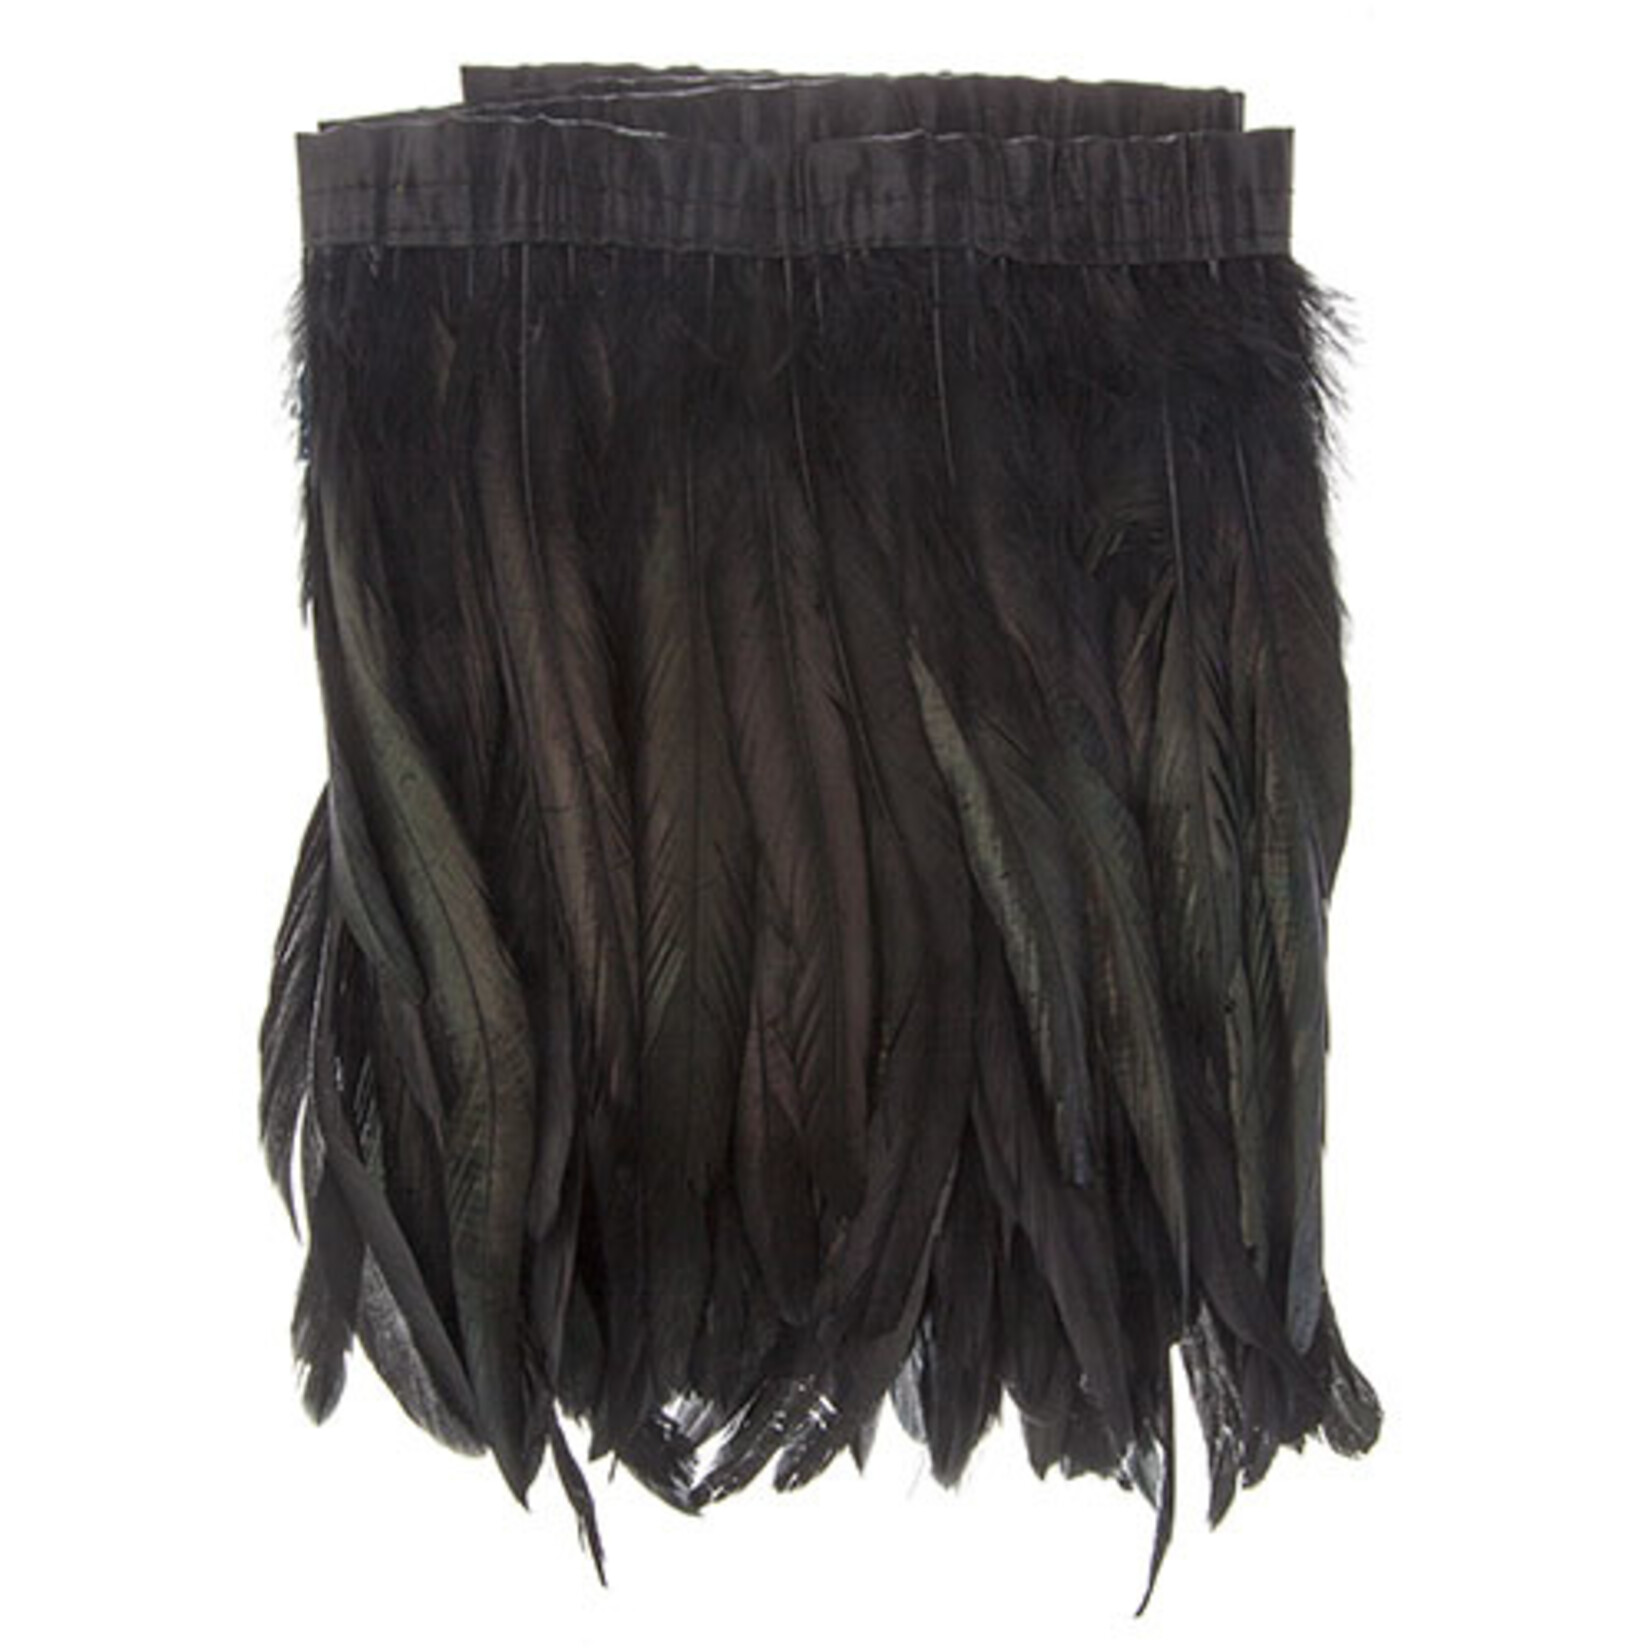 Coque Feathers Value 12-14 Inches Black